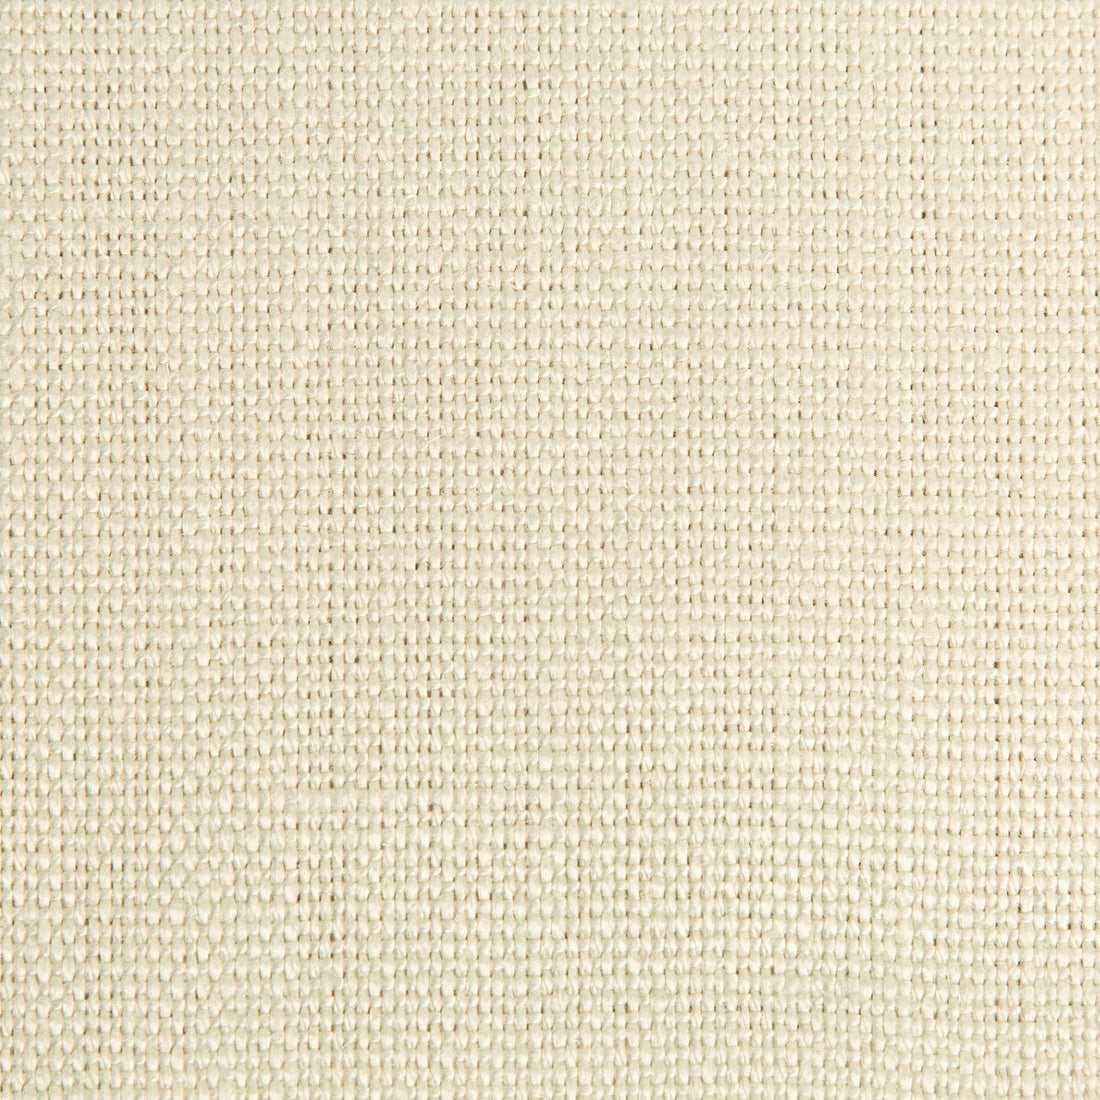 Stone Harbor fabric in flake color - pattern 27591.1011.0 - by Kravet Basics in the The Complete Linen IV collection